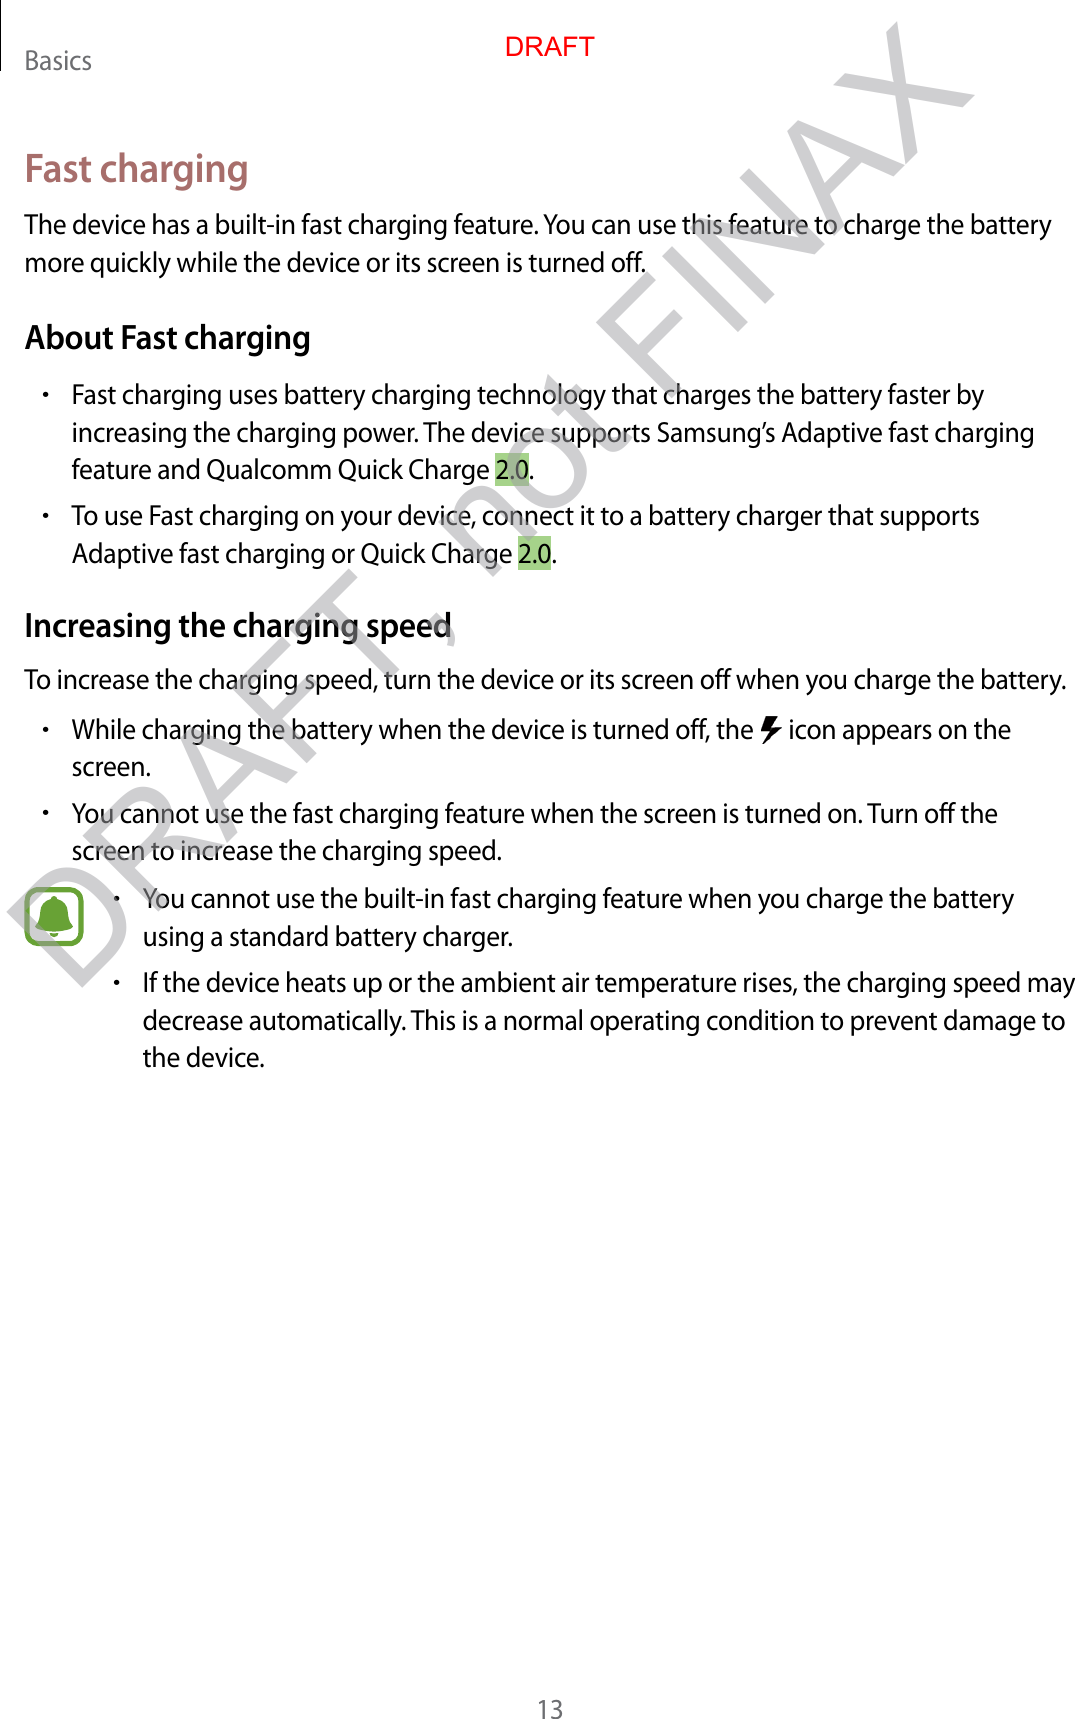 Basics13Fast chargingThe device has a built-in fast charging feature. You can use this feature to charge the battery more quickly while the device or its screen is turned off.About Fast charging•Fast charging uses battery charging technology that charges the battery faster by increasing the charging power. The device supports Samsung’s Adaptive fast charging feature and Qualcomm Quick Charge 2.0.•To use Fast charging on your device, connect it to a battery charger that supports Adaptive fast charging or Quick Charge 2.0.Increasing the charging speedTo increase the charging speed, turn the device or its screen off when you charge the battery.•While charging the battery when the device is turned off, the   icon appears on the screen.•You cannot use the fast charging feature when the screen is turned on. Turn off the screen to increase the charging speed.•You cannot use the built-in fast charging feature when you charge the battery using a standard battery charger.•If the device heats up or the ambient air temperature rises, the charging speed may decrease automatically. This is a normal operating condition to prevent damage to the device.DRAFTDRAFT, not FINAX